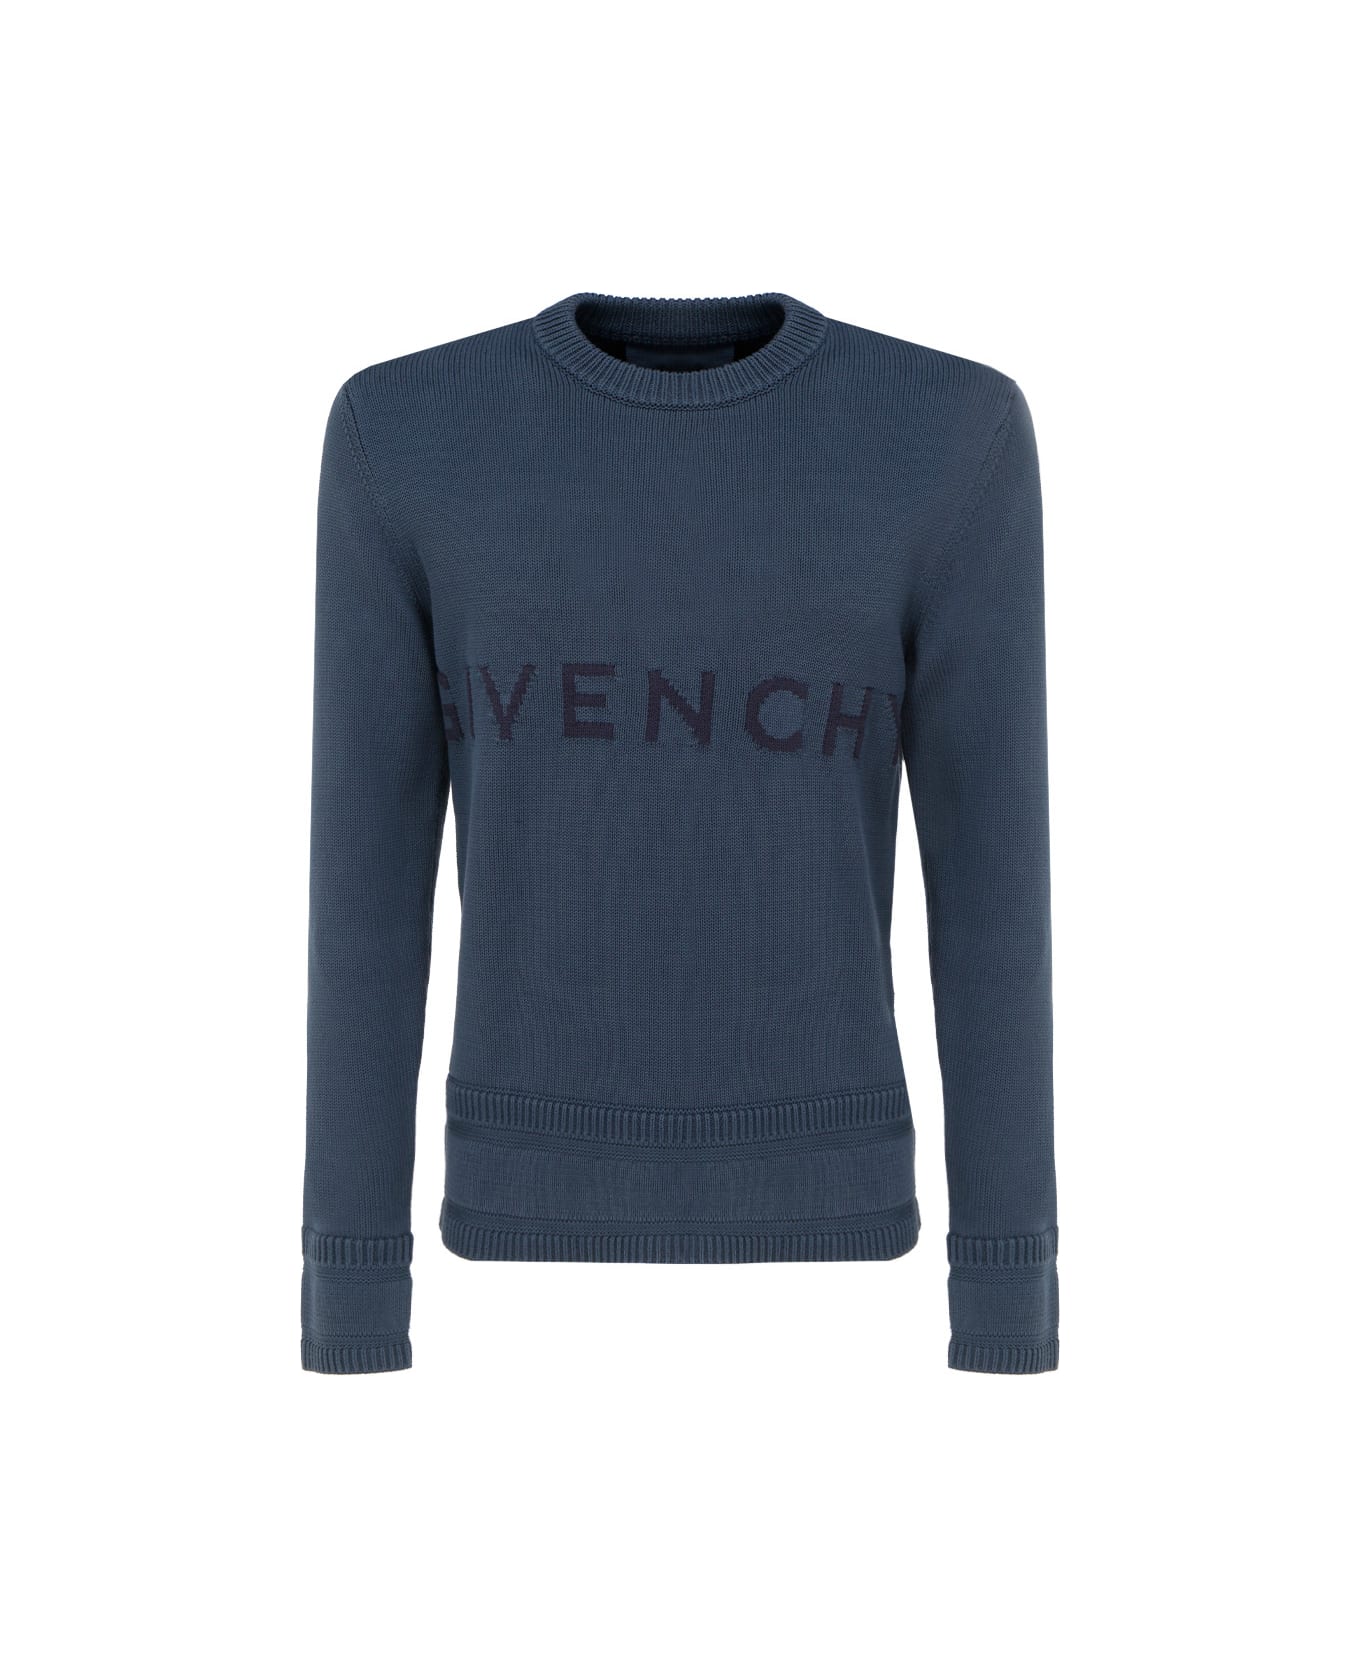 Givenchy Sweater - Blue/navy